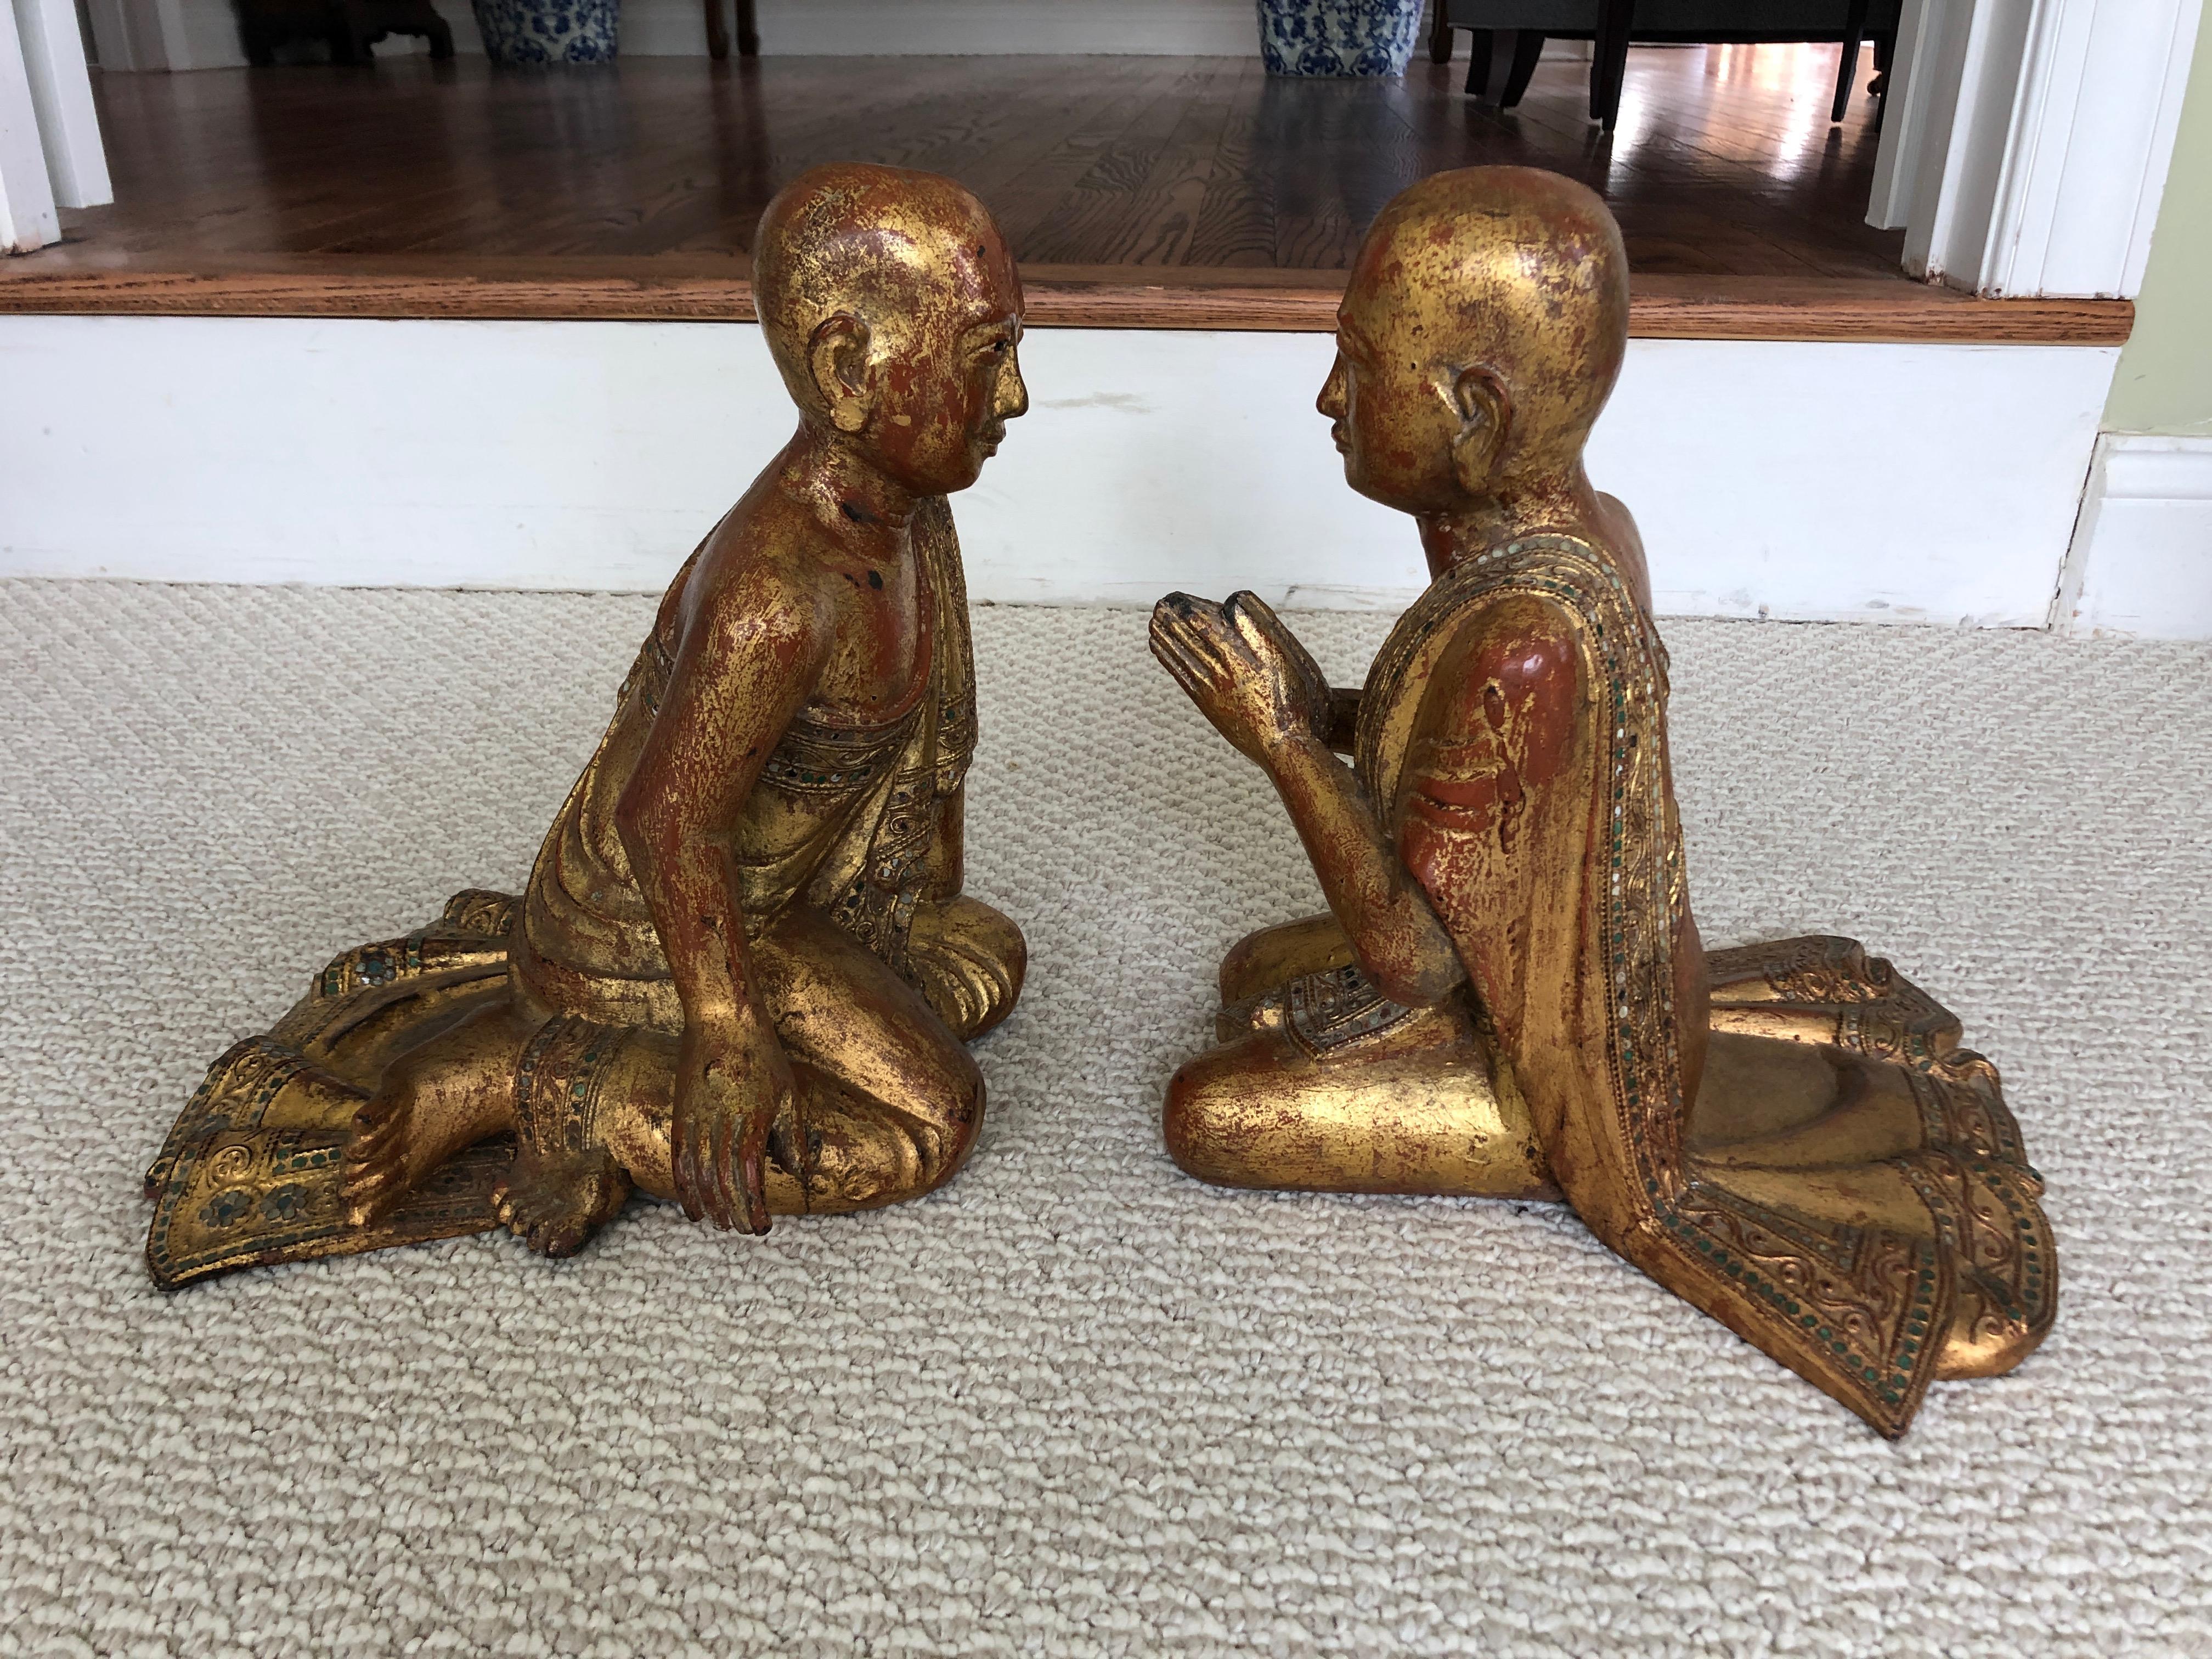 Burmese Marvellous Pair of 19th Century Gilded and Gem Encrusted Seated Monk Sculptures